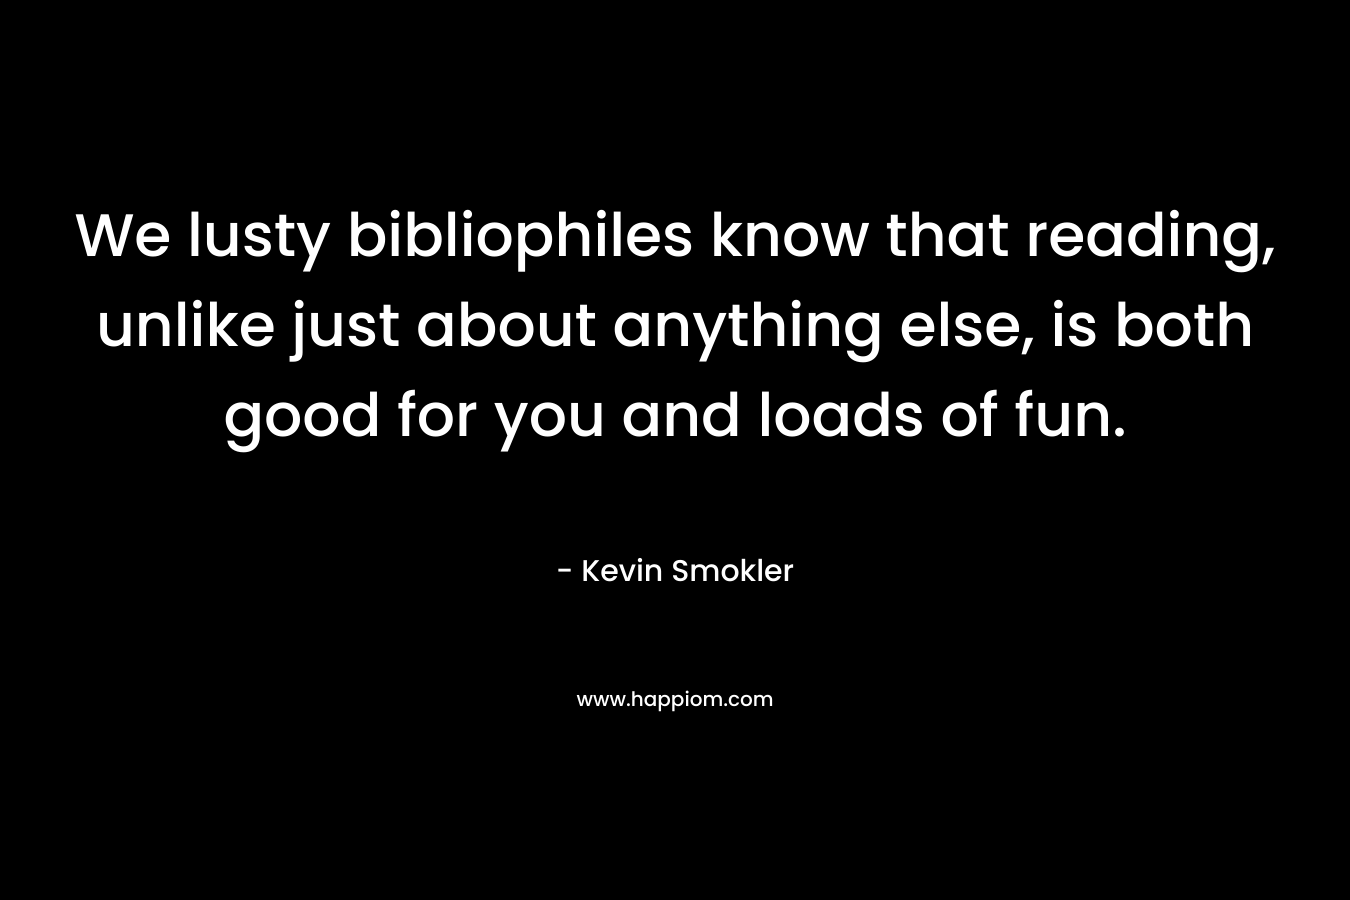 We lusty bibliophiles know that reading, unlike just about anything else, is both good for you and loads of fun.